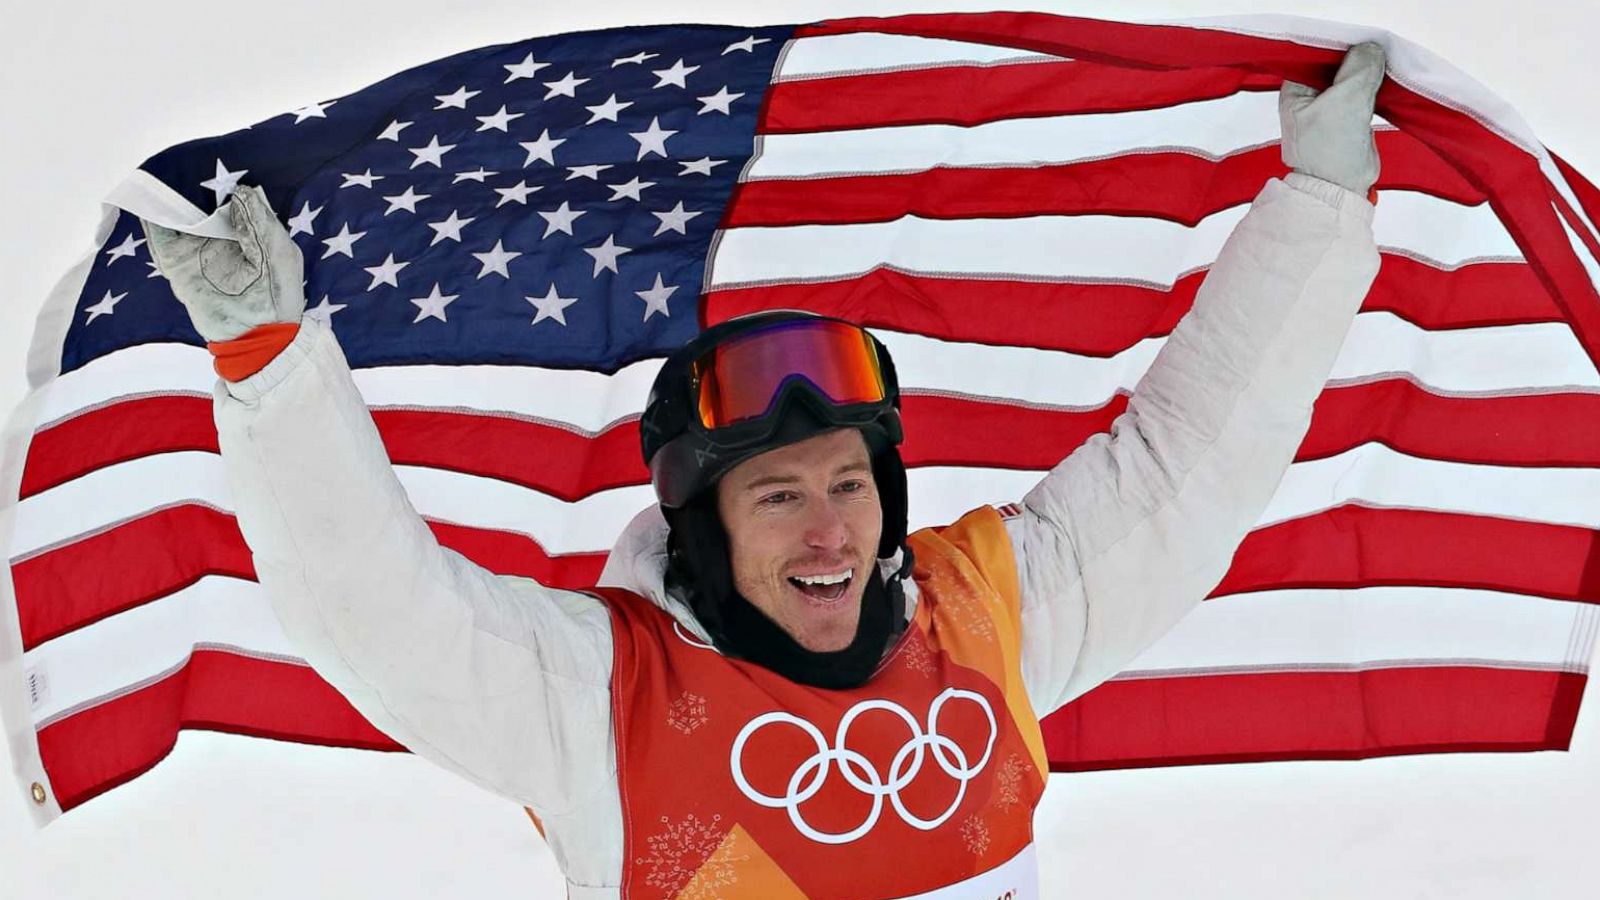 Look: Shaun White has cool Olympic tribute to celebrity who died last year